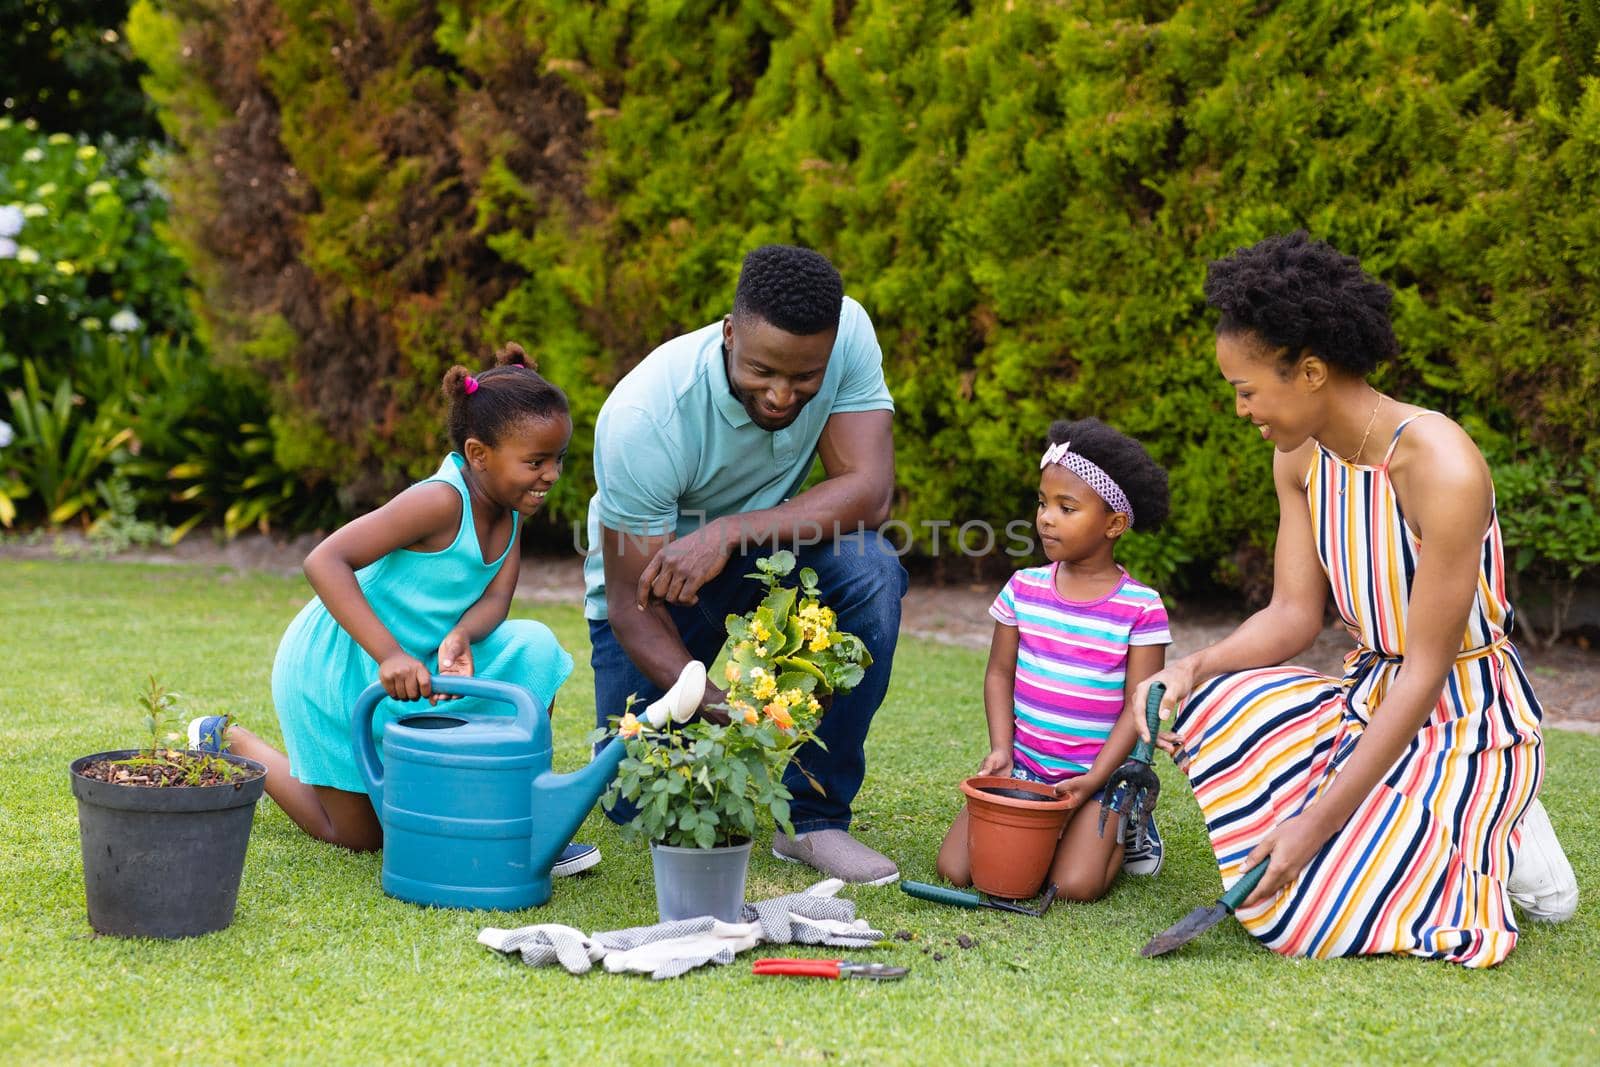 African american family watering the plants together in the garden. family, love and togetherness concept, unaltered.